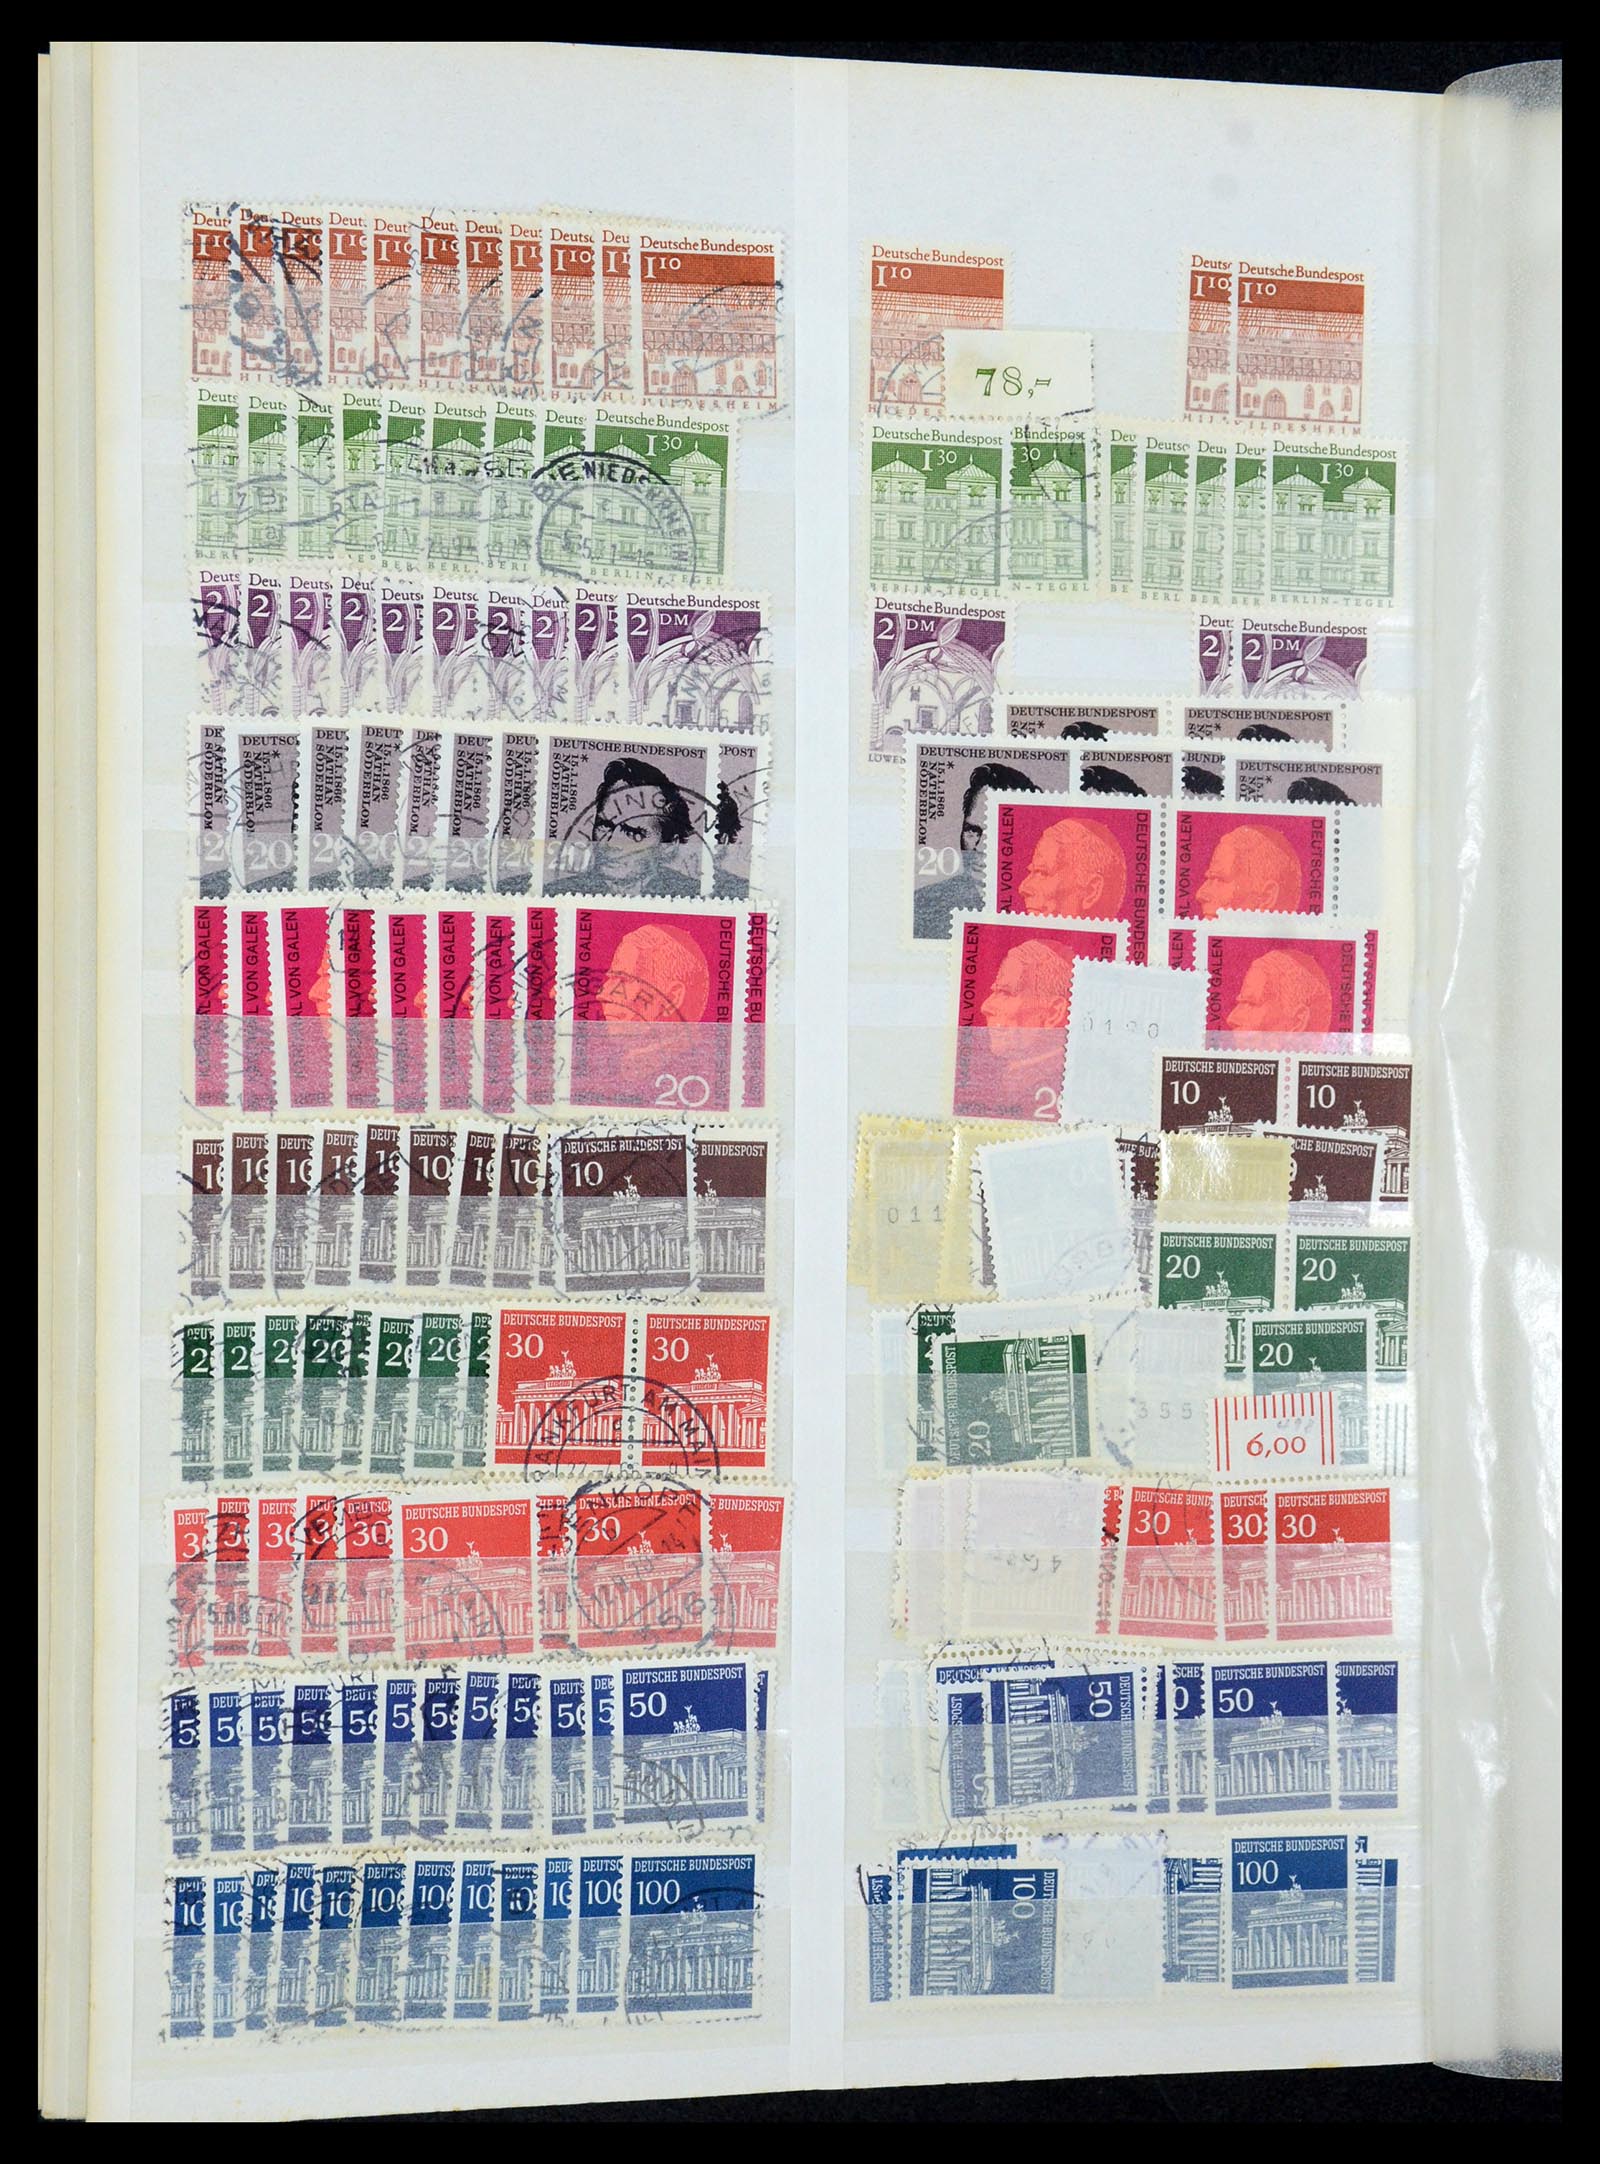 35899 044 - Stamp Collection 35899 Bundespost 1949-1985.